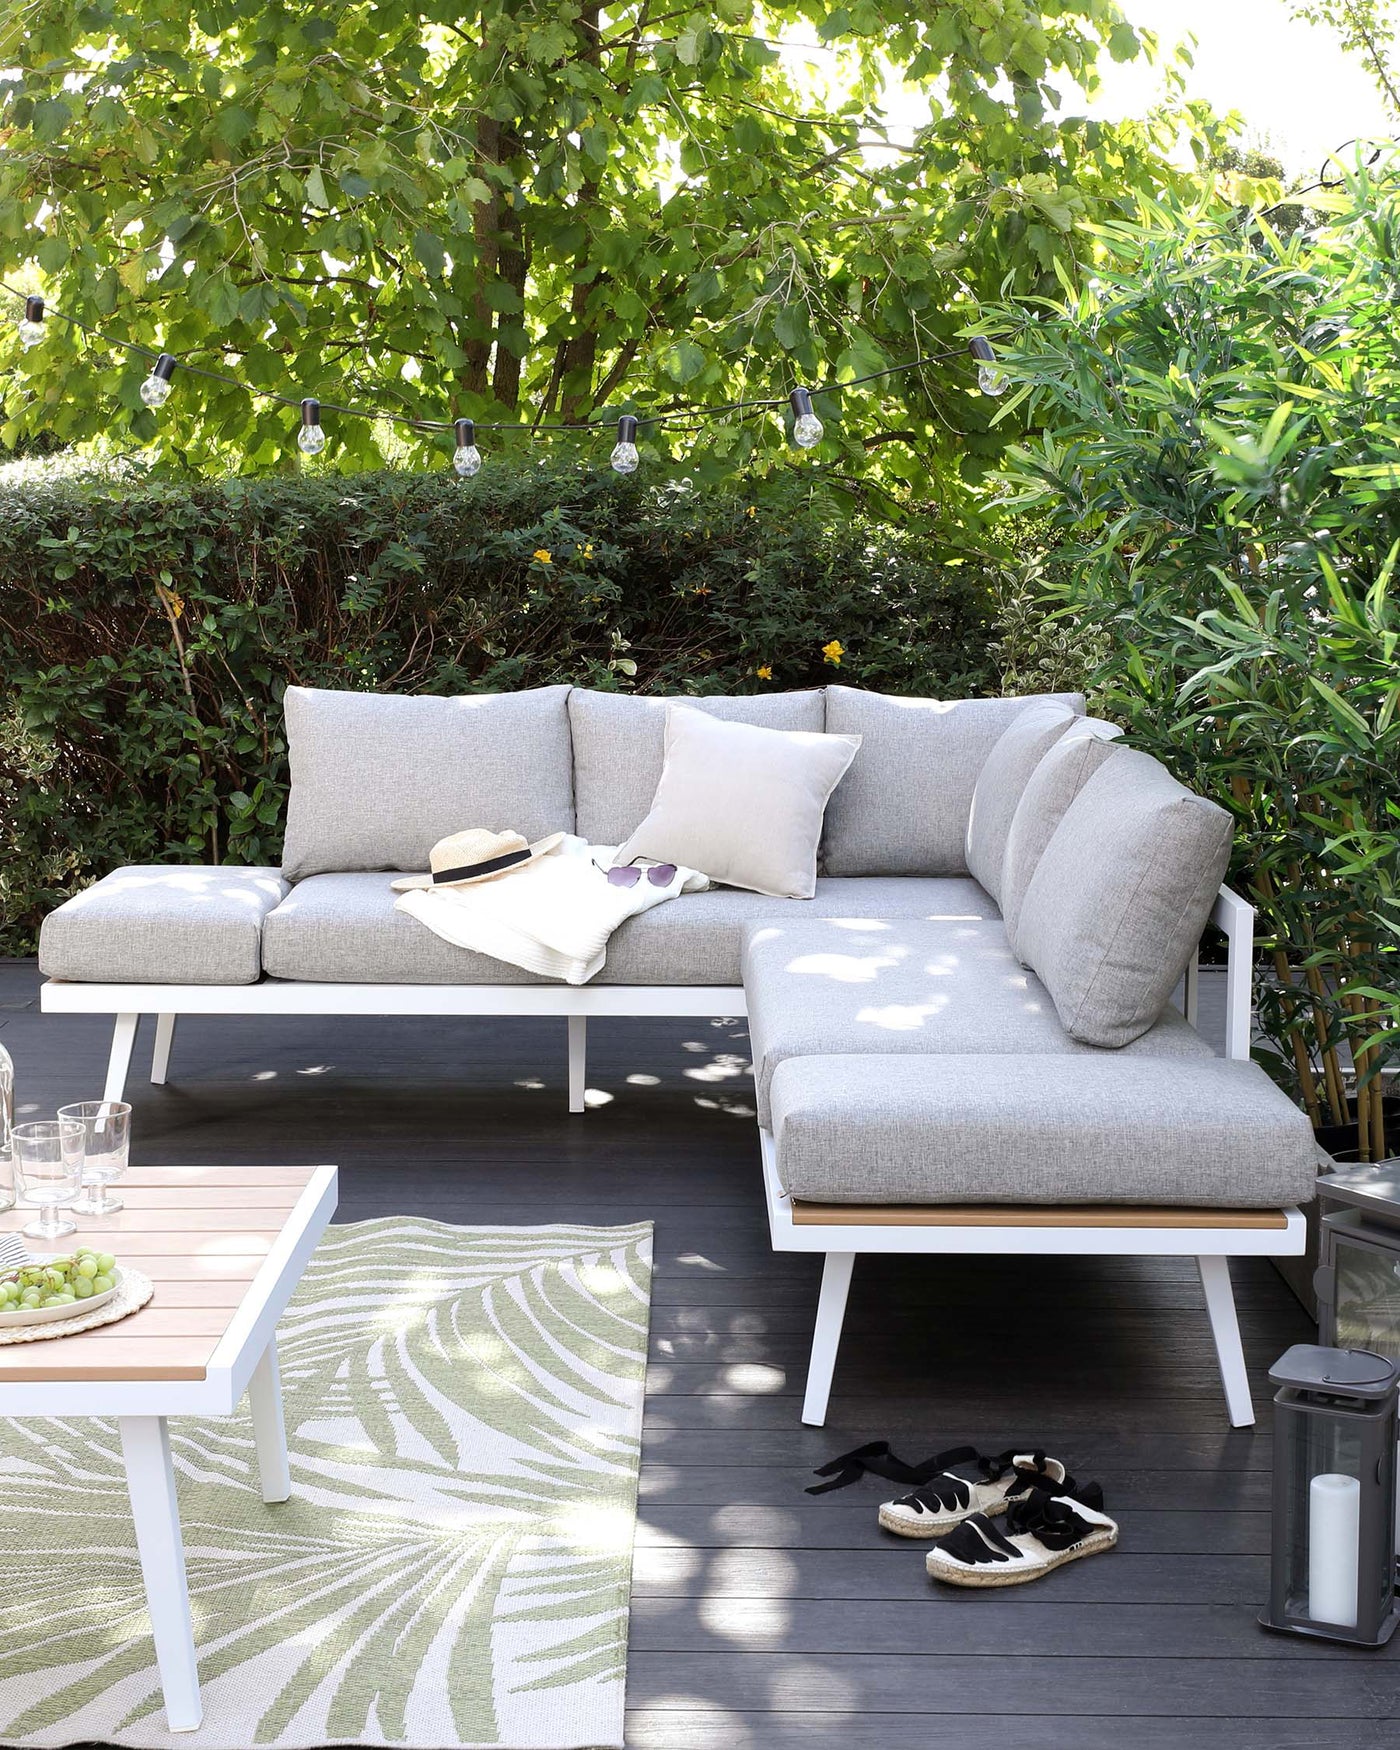 Outdoor furniture set on a wooden deck with a light grey upholstered corner sofa and a white minimalist coffee table, complemented by patterned area rug and ambient string lights above.